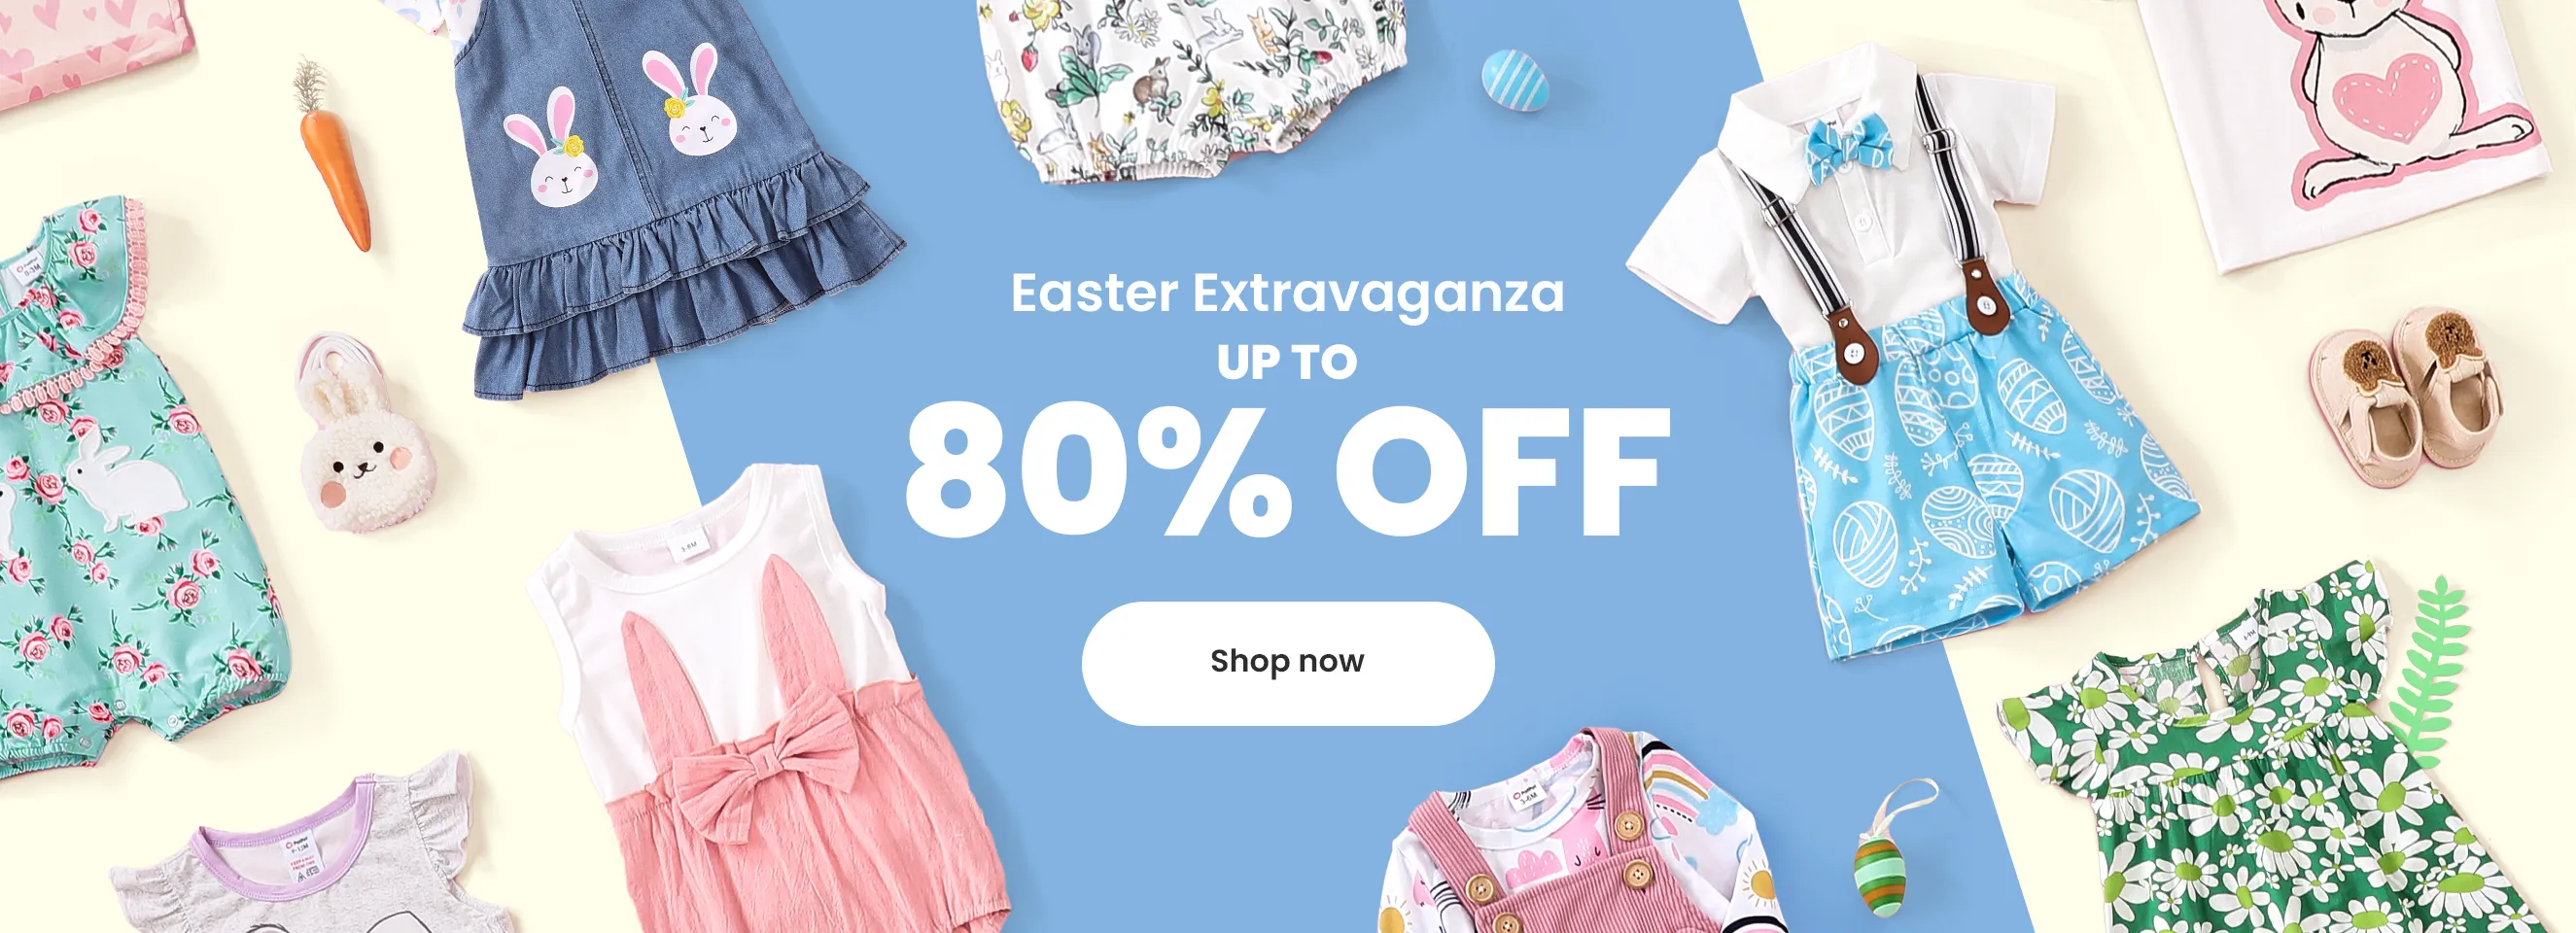 Click it to join Easter Extravaganza activity